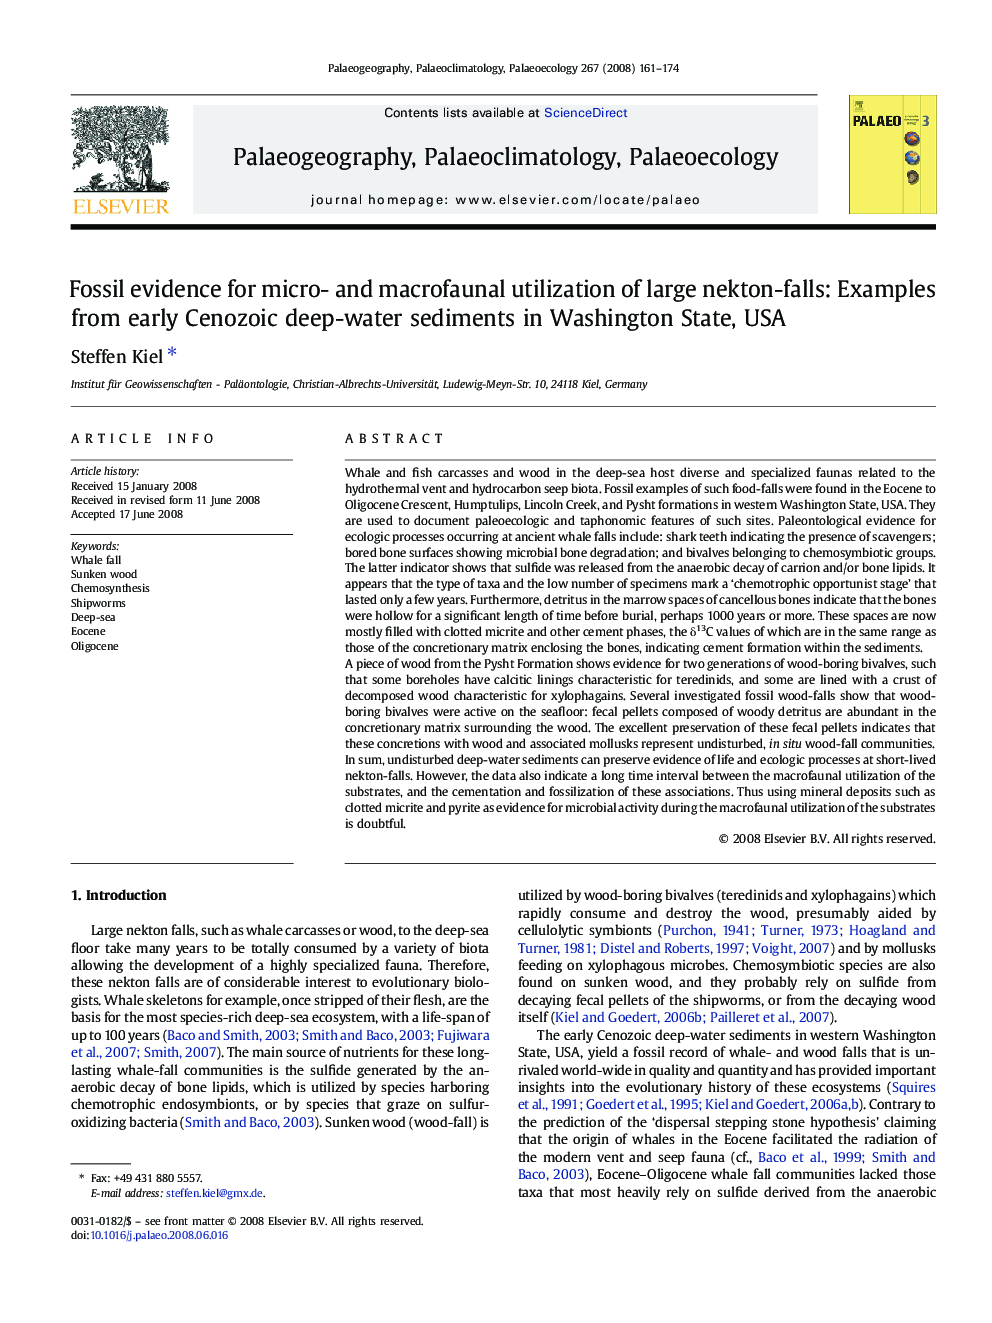 Fossil evidence for micro- and macrofaunal utilization of large nekton-falls: Examples from early Cenozoic deep-water sediments in Washington State, USA